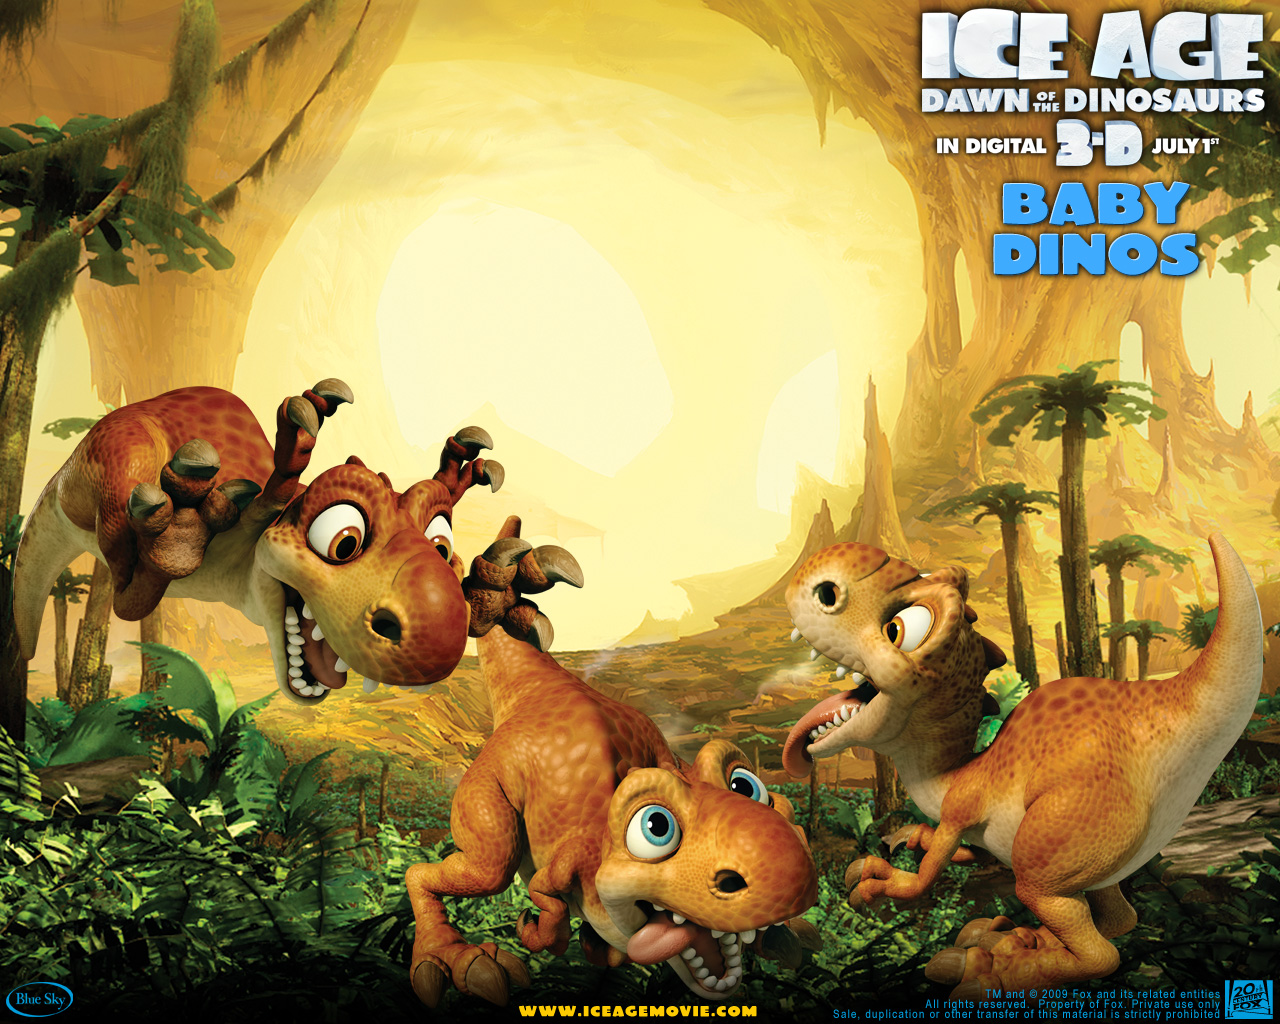 Download HQ Ice Age Dawn Of The Dinosaurs wallpaper / Cartoons / 1280x1024